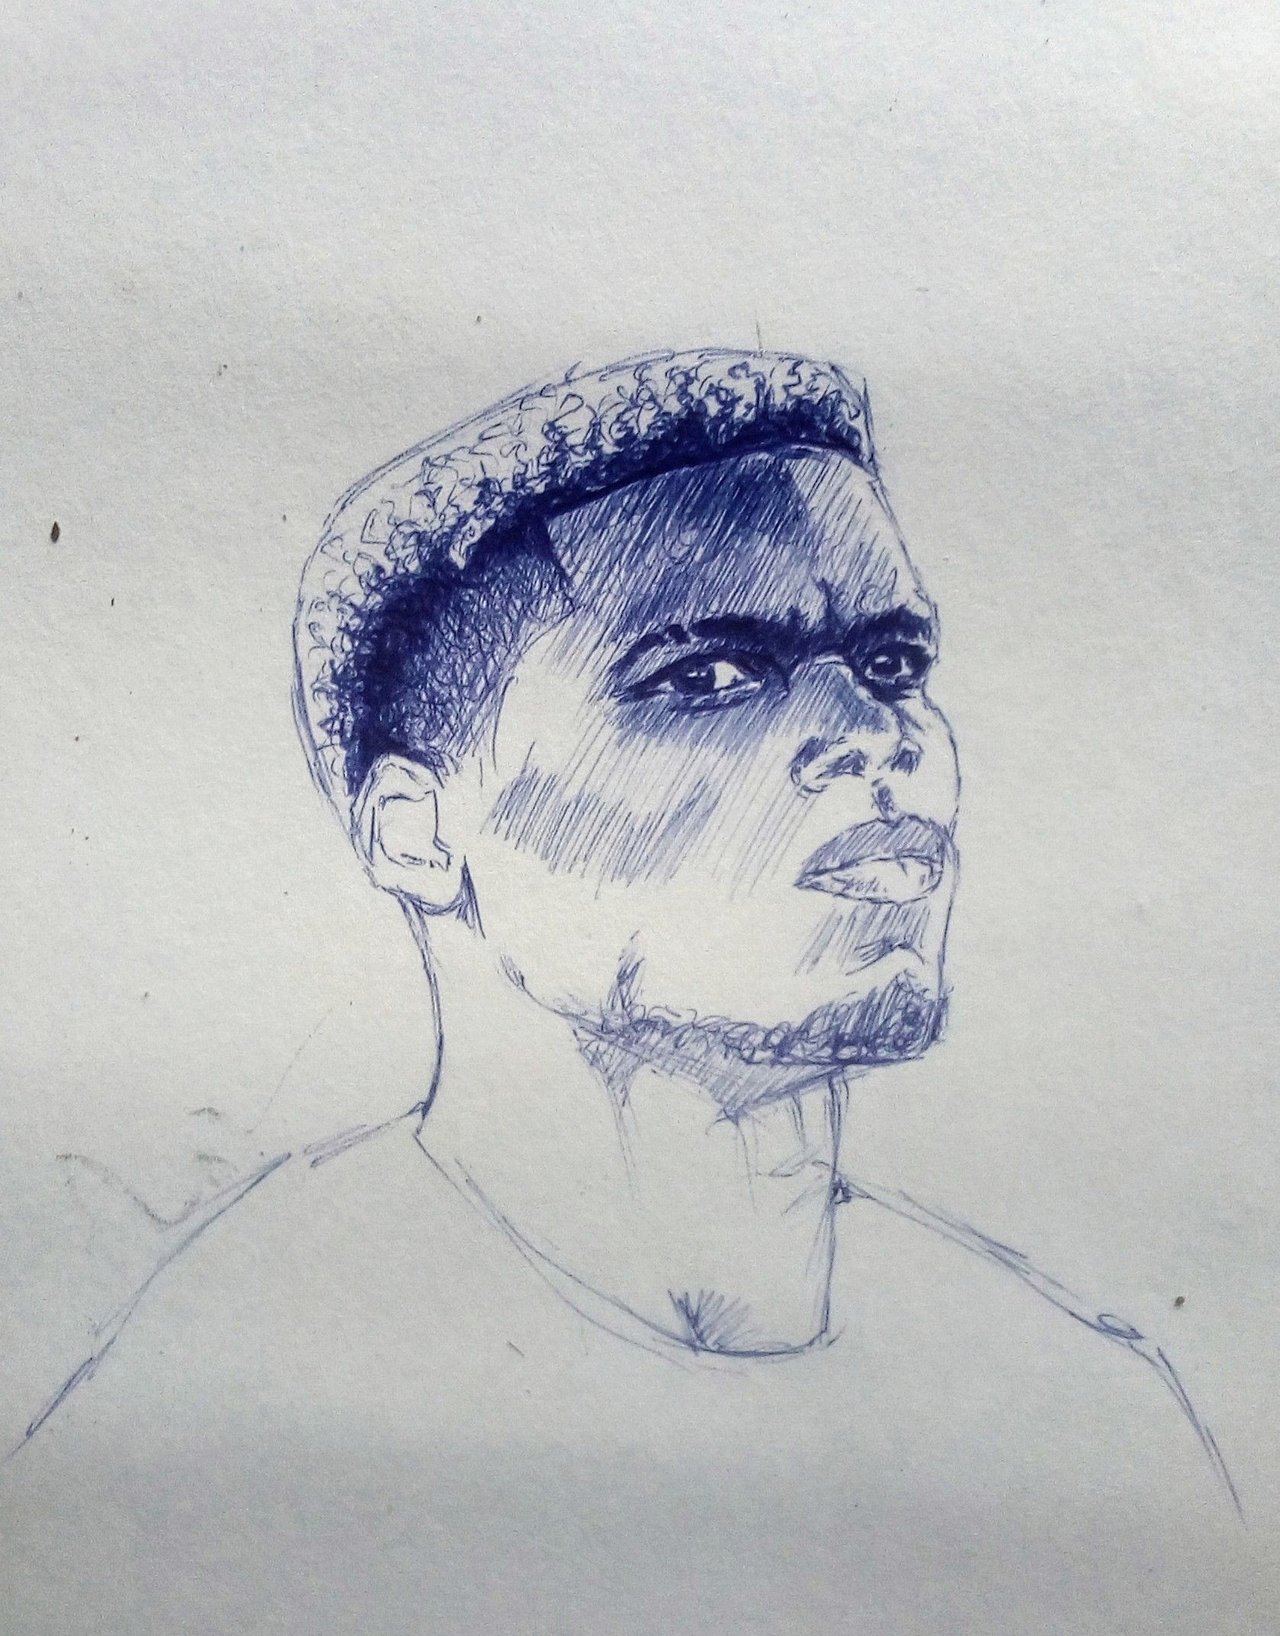 Paul Pogba drawing by TanmayC7 on DeviantArt